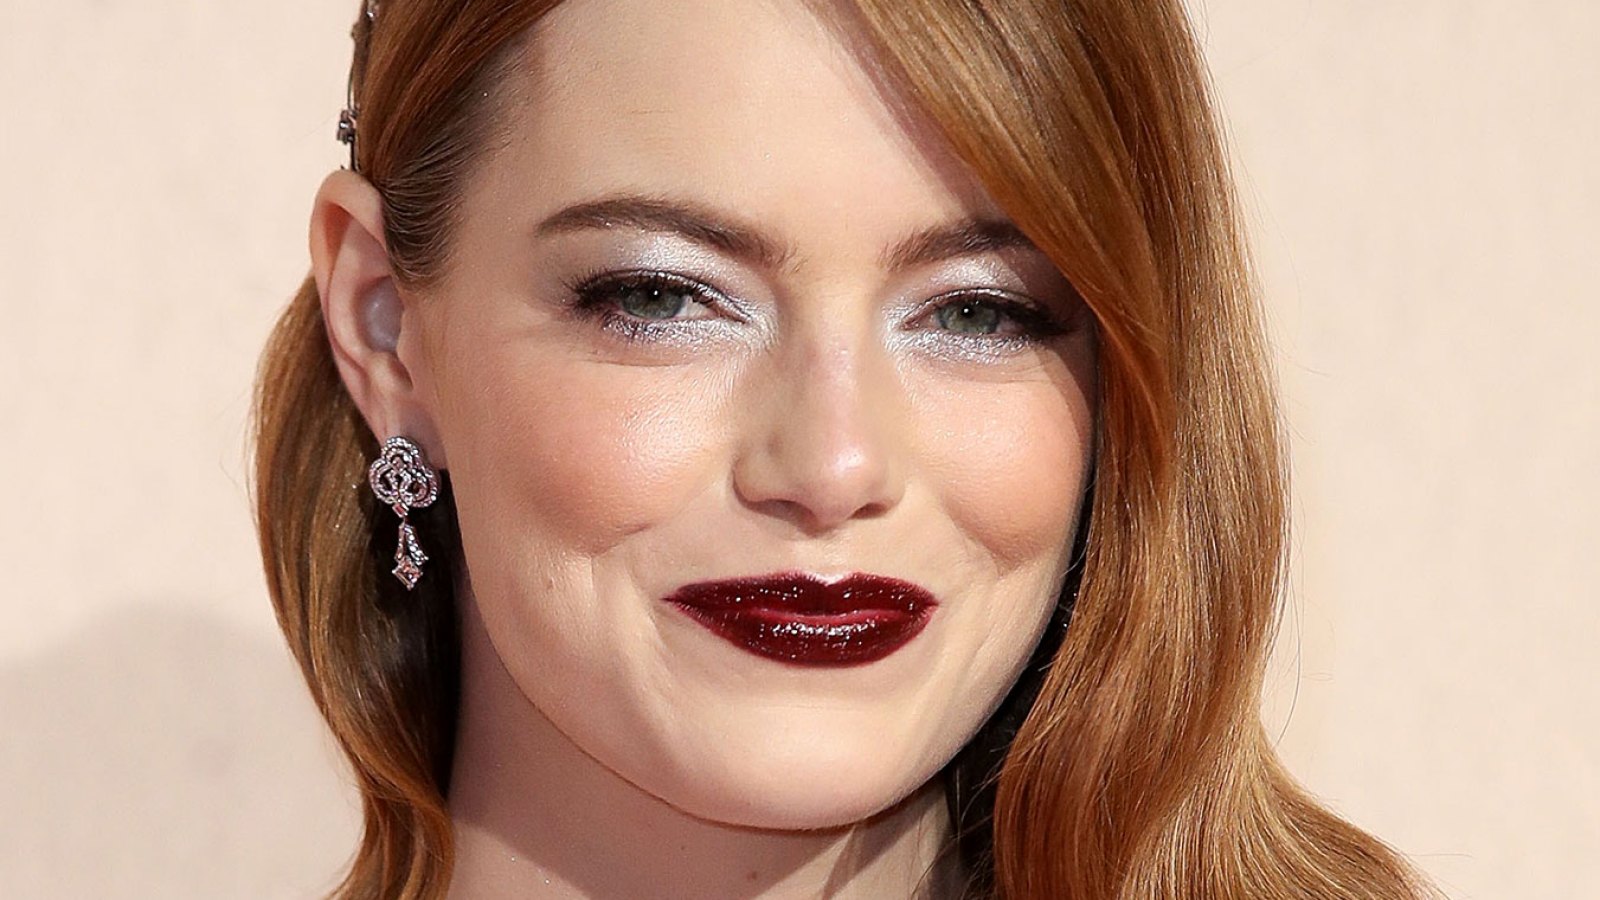 Emma Stone on Using Fragrance to Get Into Character, and Her